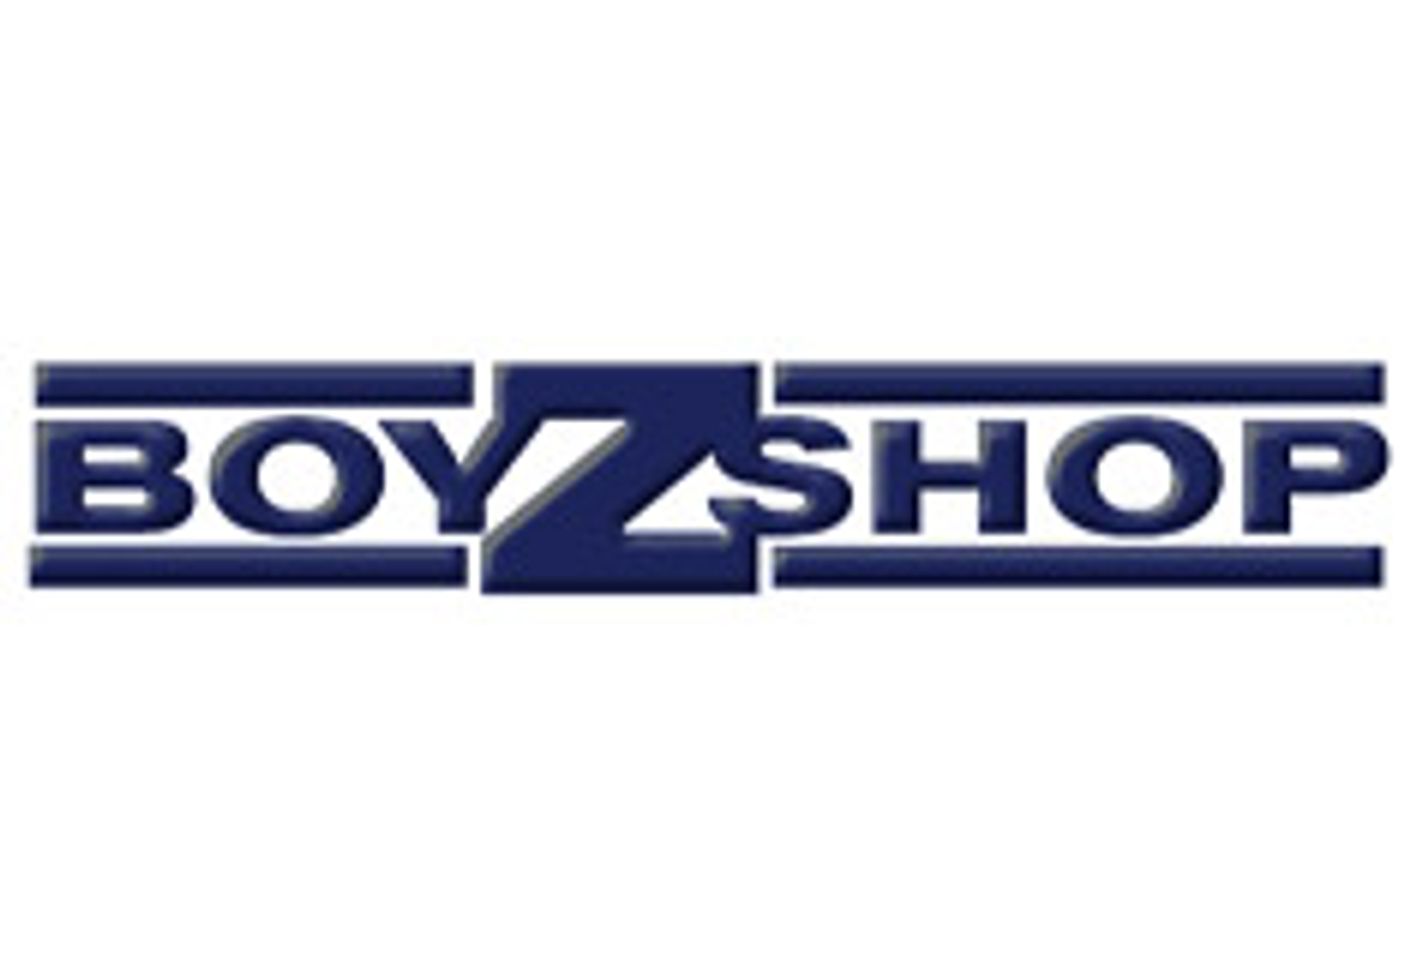 NicheShops Releases New Version of BoyzShop, Hires New Marketing Manager